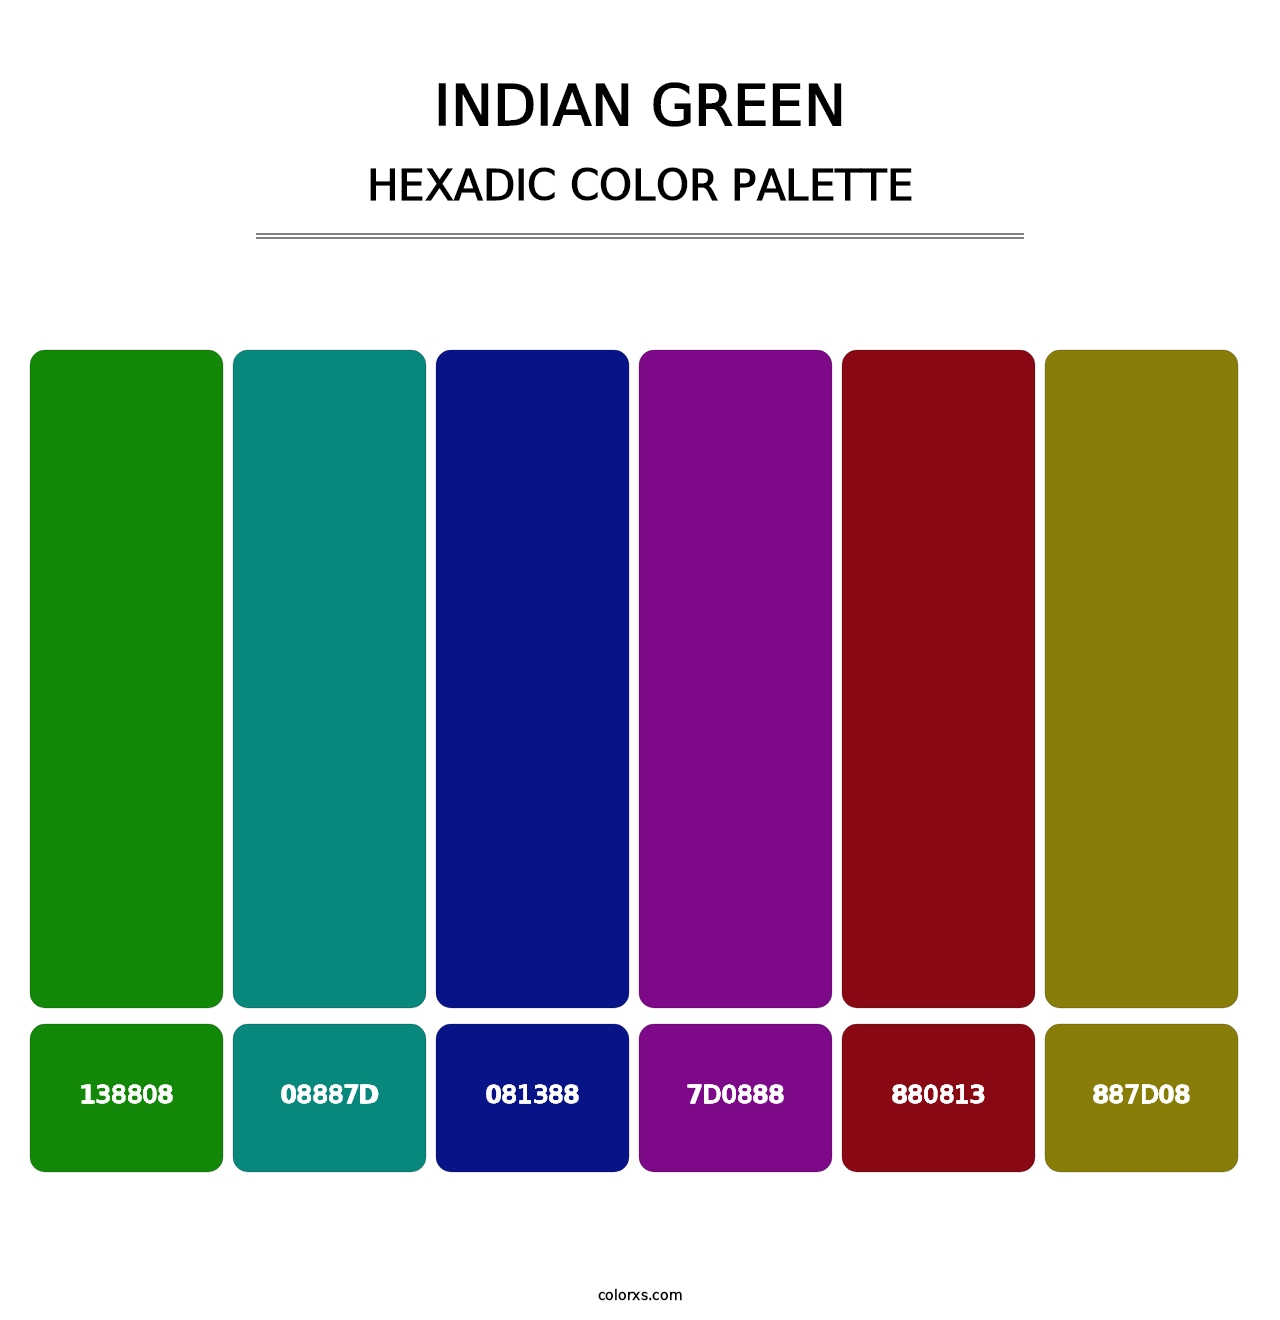 Indian Green - Hexadic Color Palette